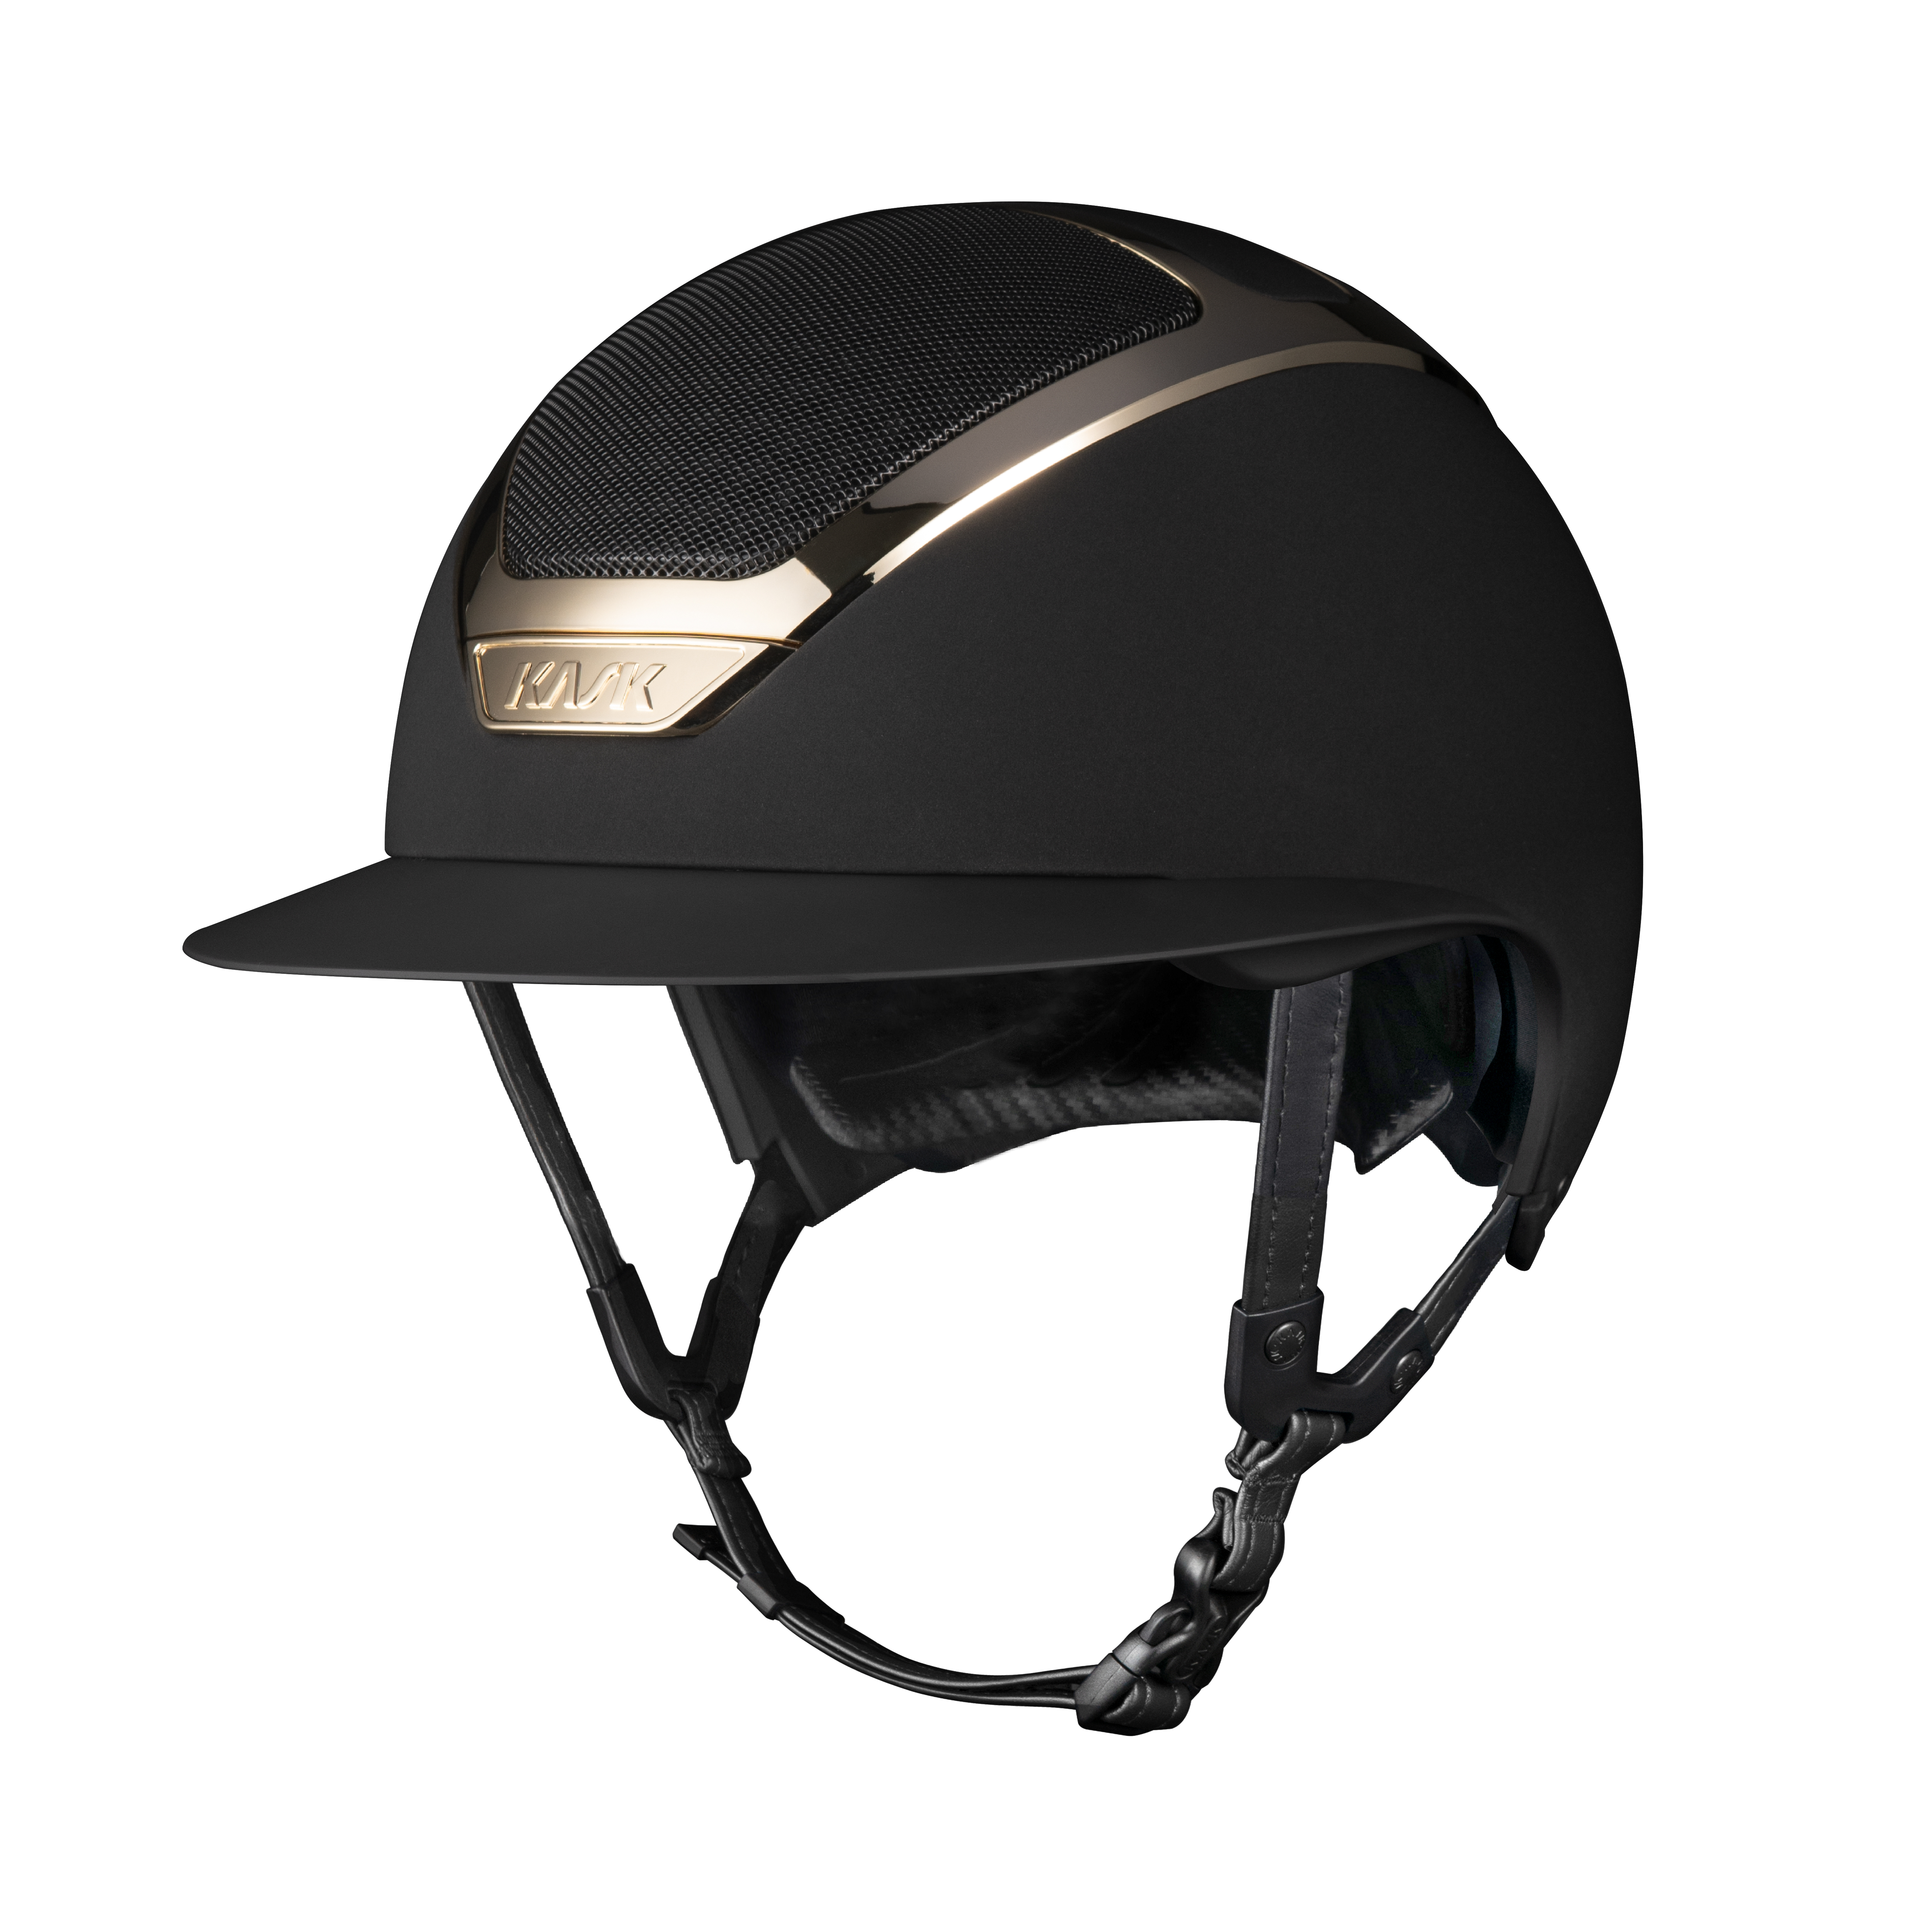 KASK Kask Reithelm Star Lady Chrome - brown - 55 - 1